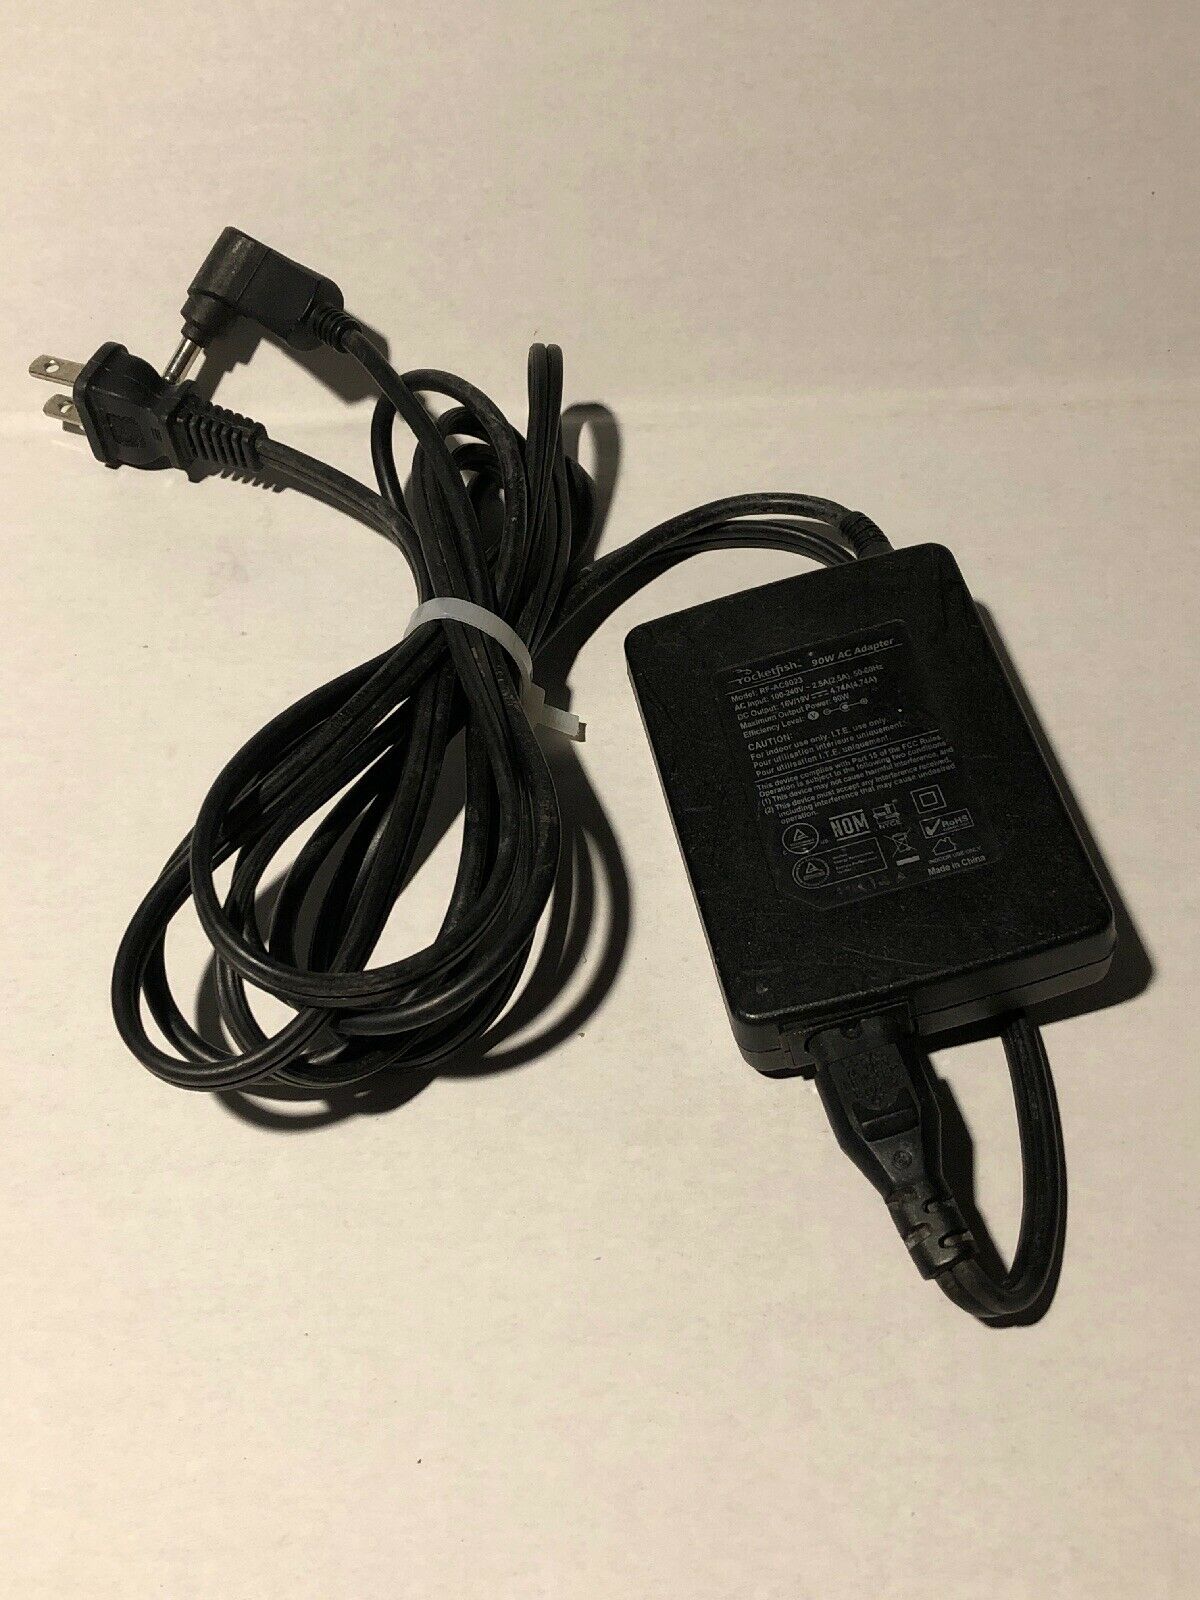 NEW Rocketfish RF-AC9023 19V 4.74A 90W AC Adapter Charger w/ Power Cord